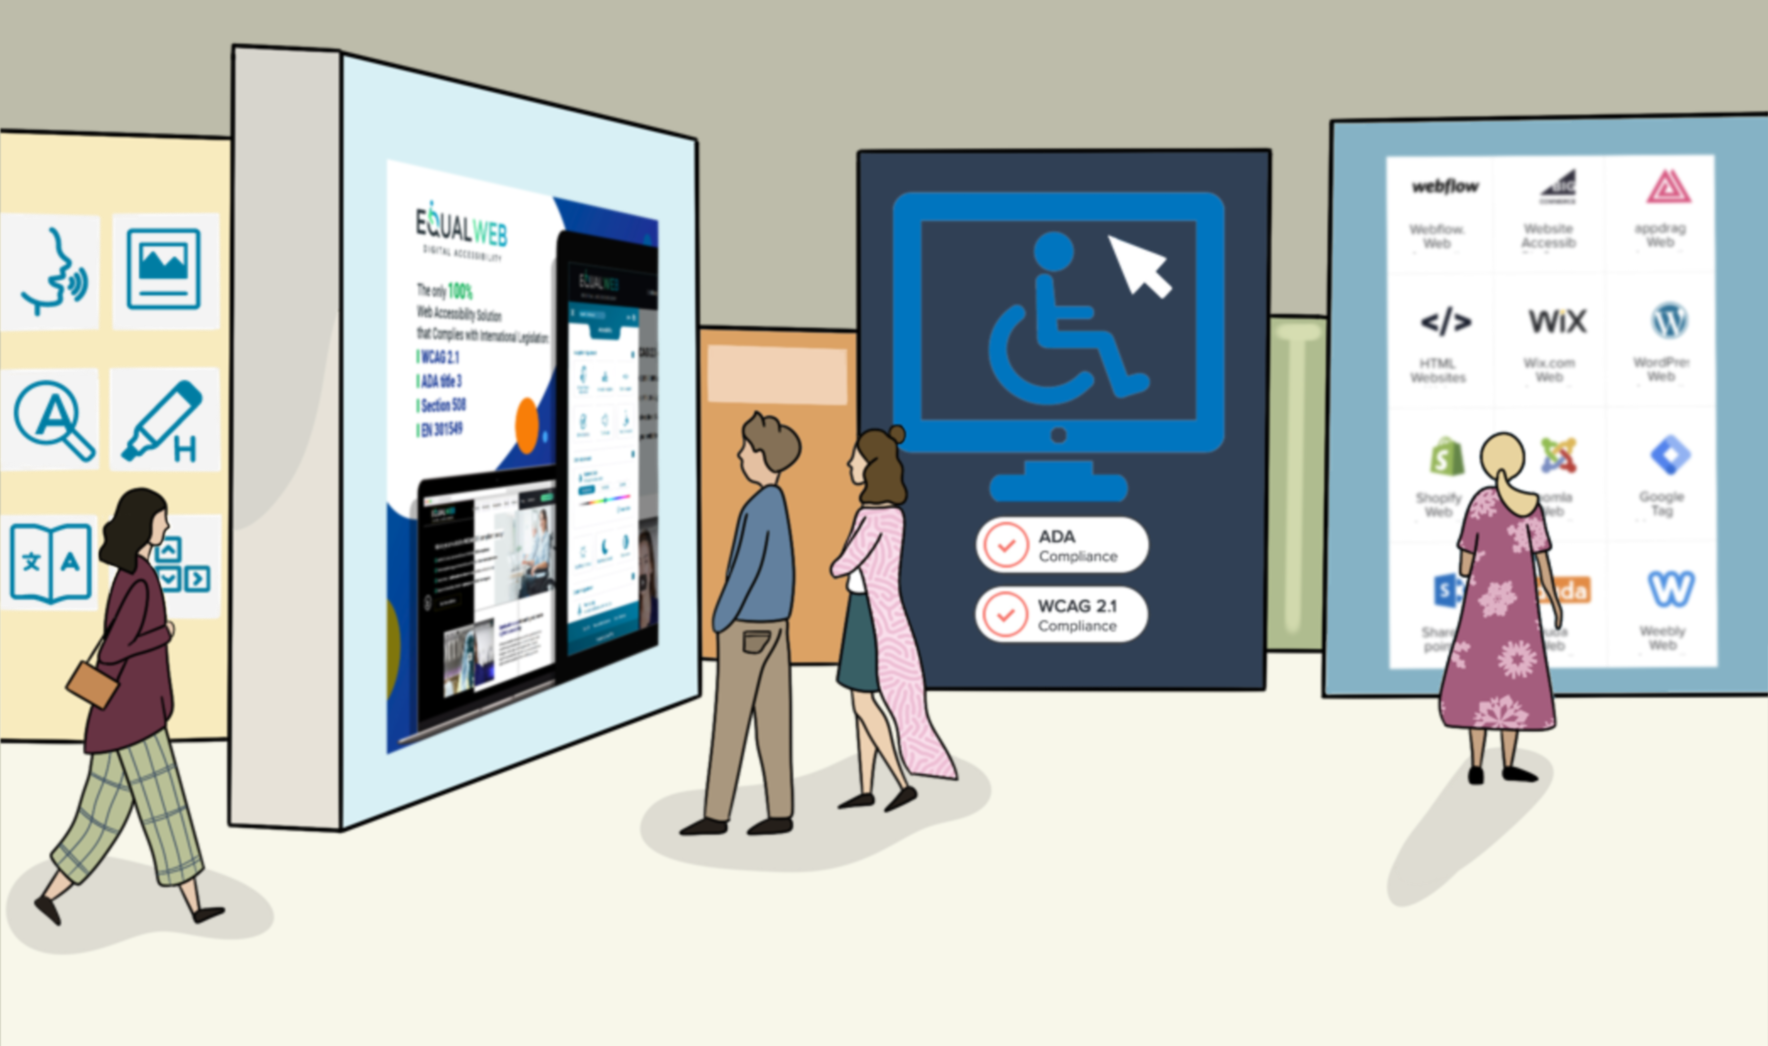 Exhibition of web accessibility features